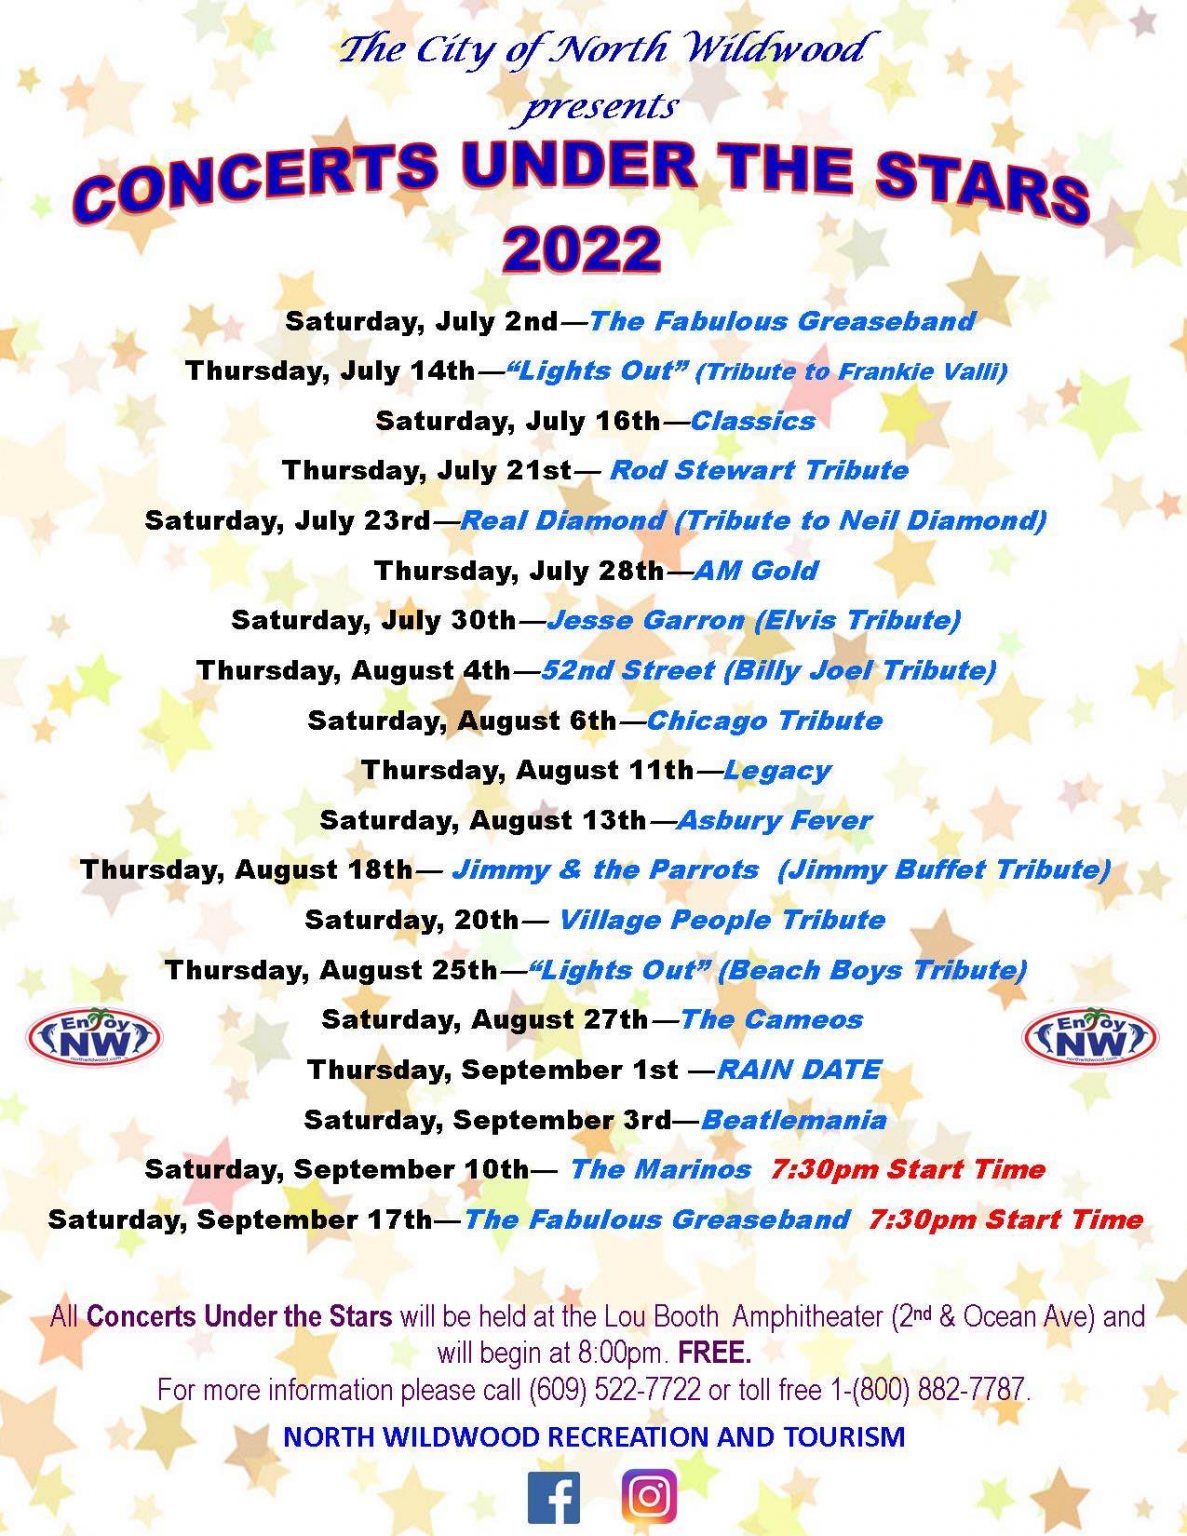 The 2022 North Wildwood Concerts Under the Stars Schedule Watch The